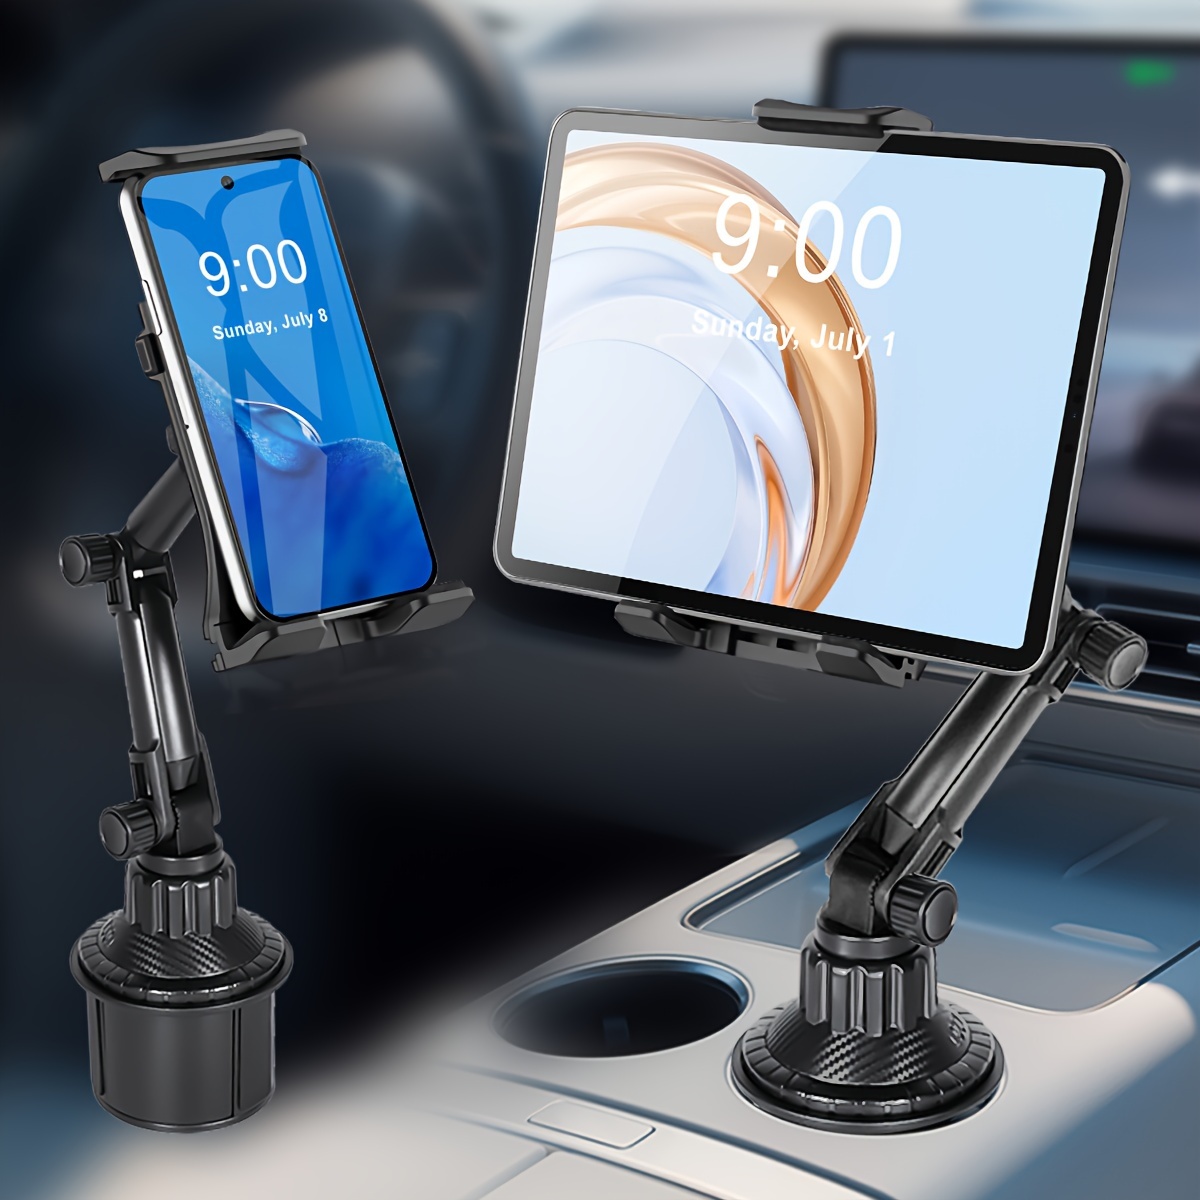 

2-in-1 Adjustable Car Cup Holder Mount For 4-13" Tablets And Smartphones, Abs Material, Rotatable And Expandable Base With One-hand Operation Feature For Safe Driving